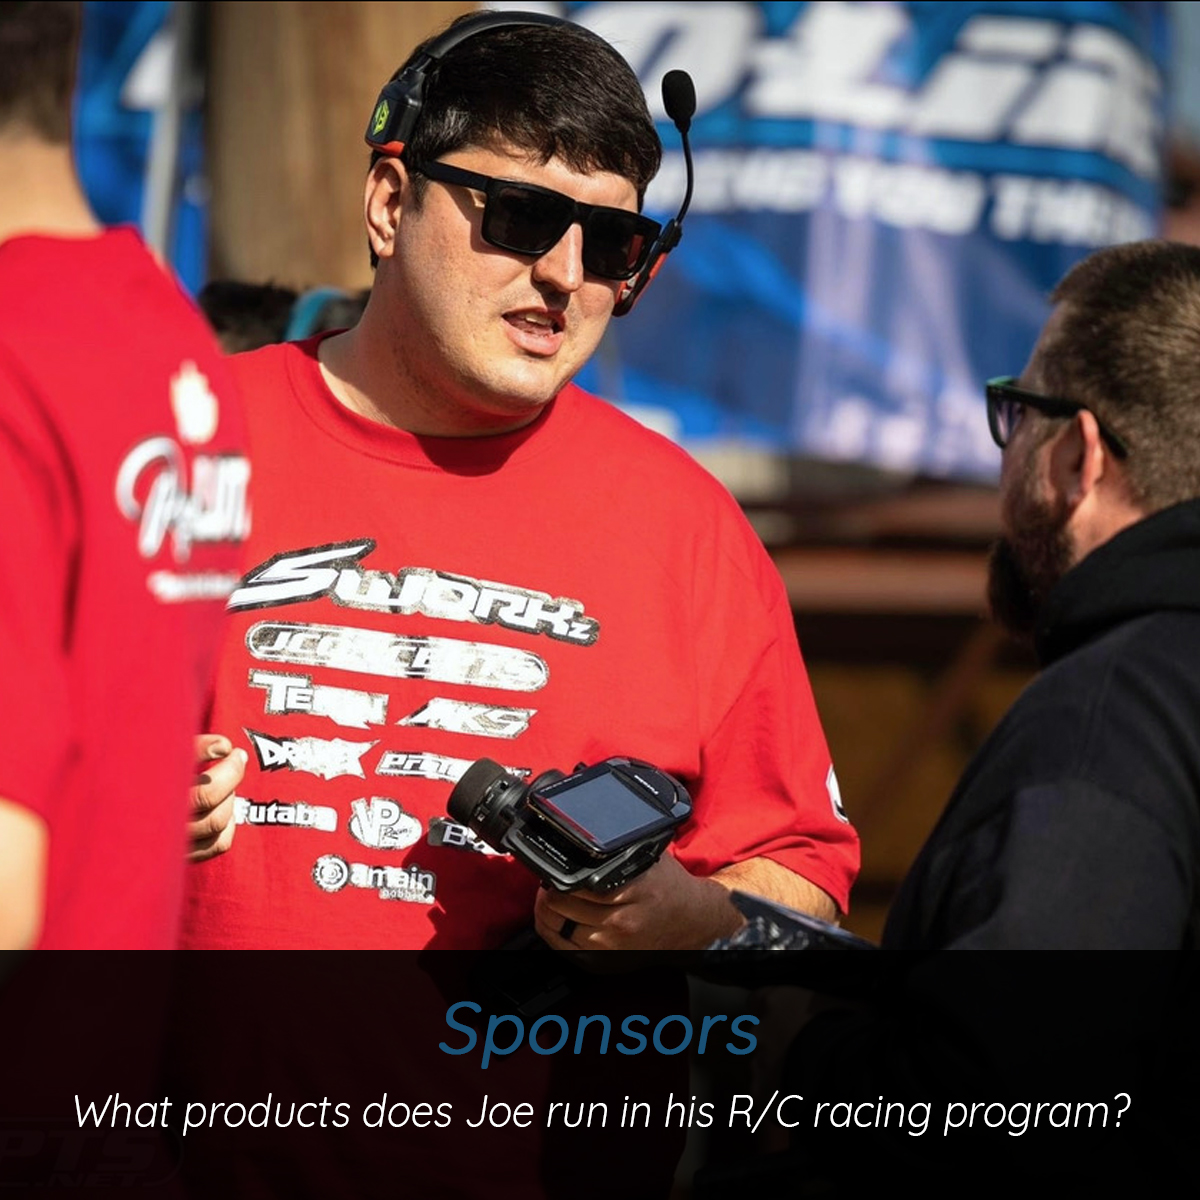 What brands does Joe use in his RC race program?